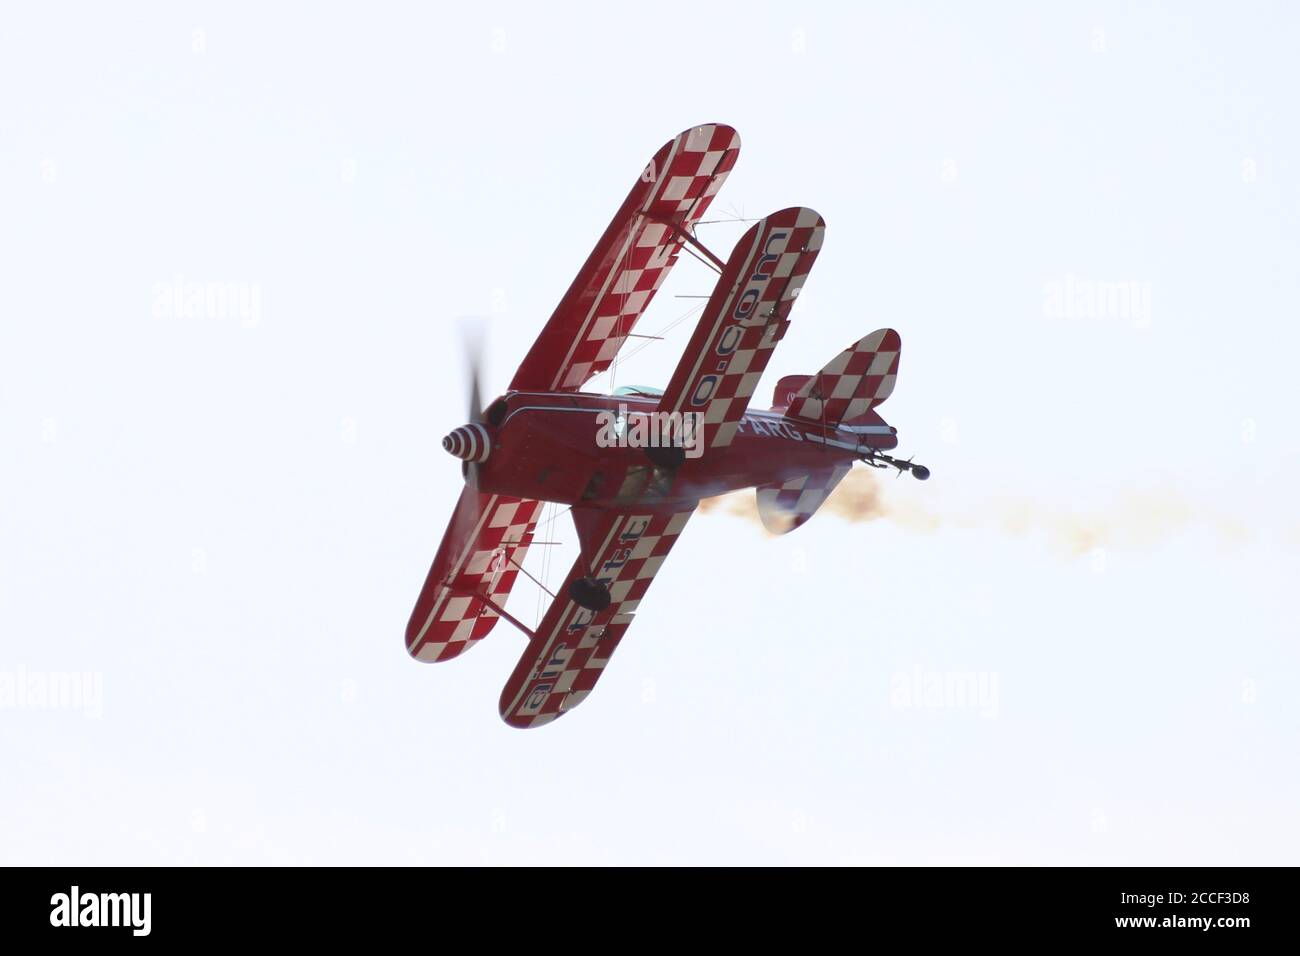 G-PARG, a privately-owned Pitts S1.S Special aerobatic biplane, displaying at the RAF Leuchars Airshow in 2012. Stock Photo